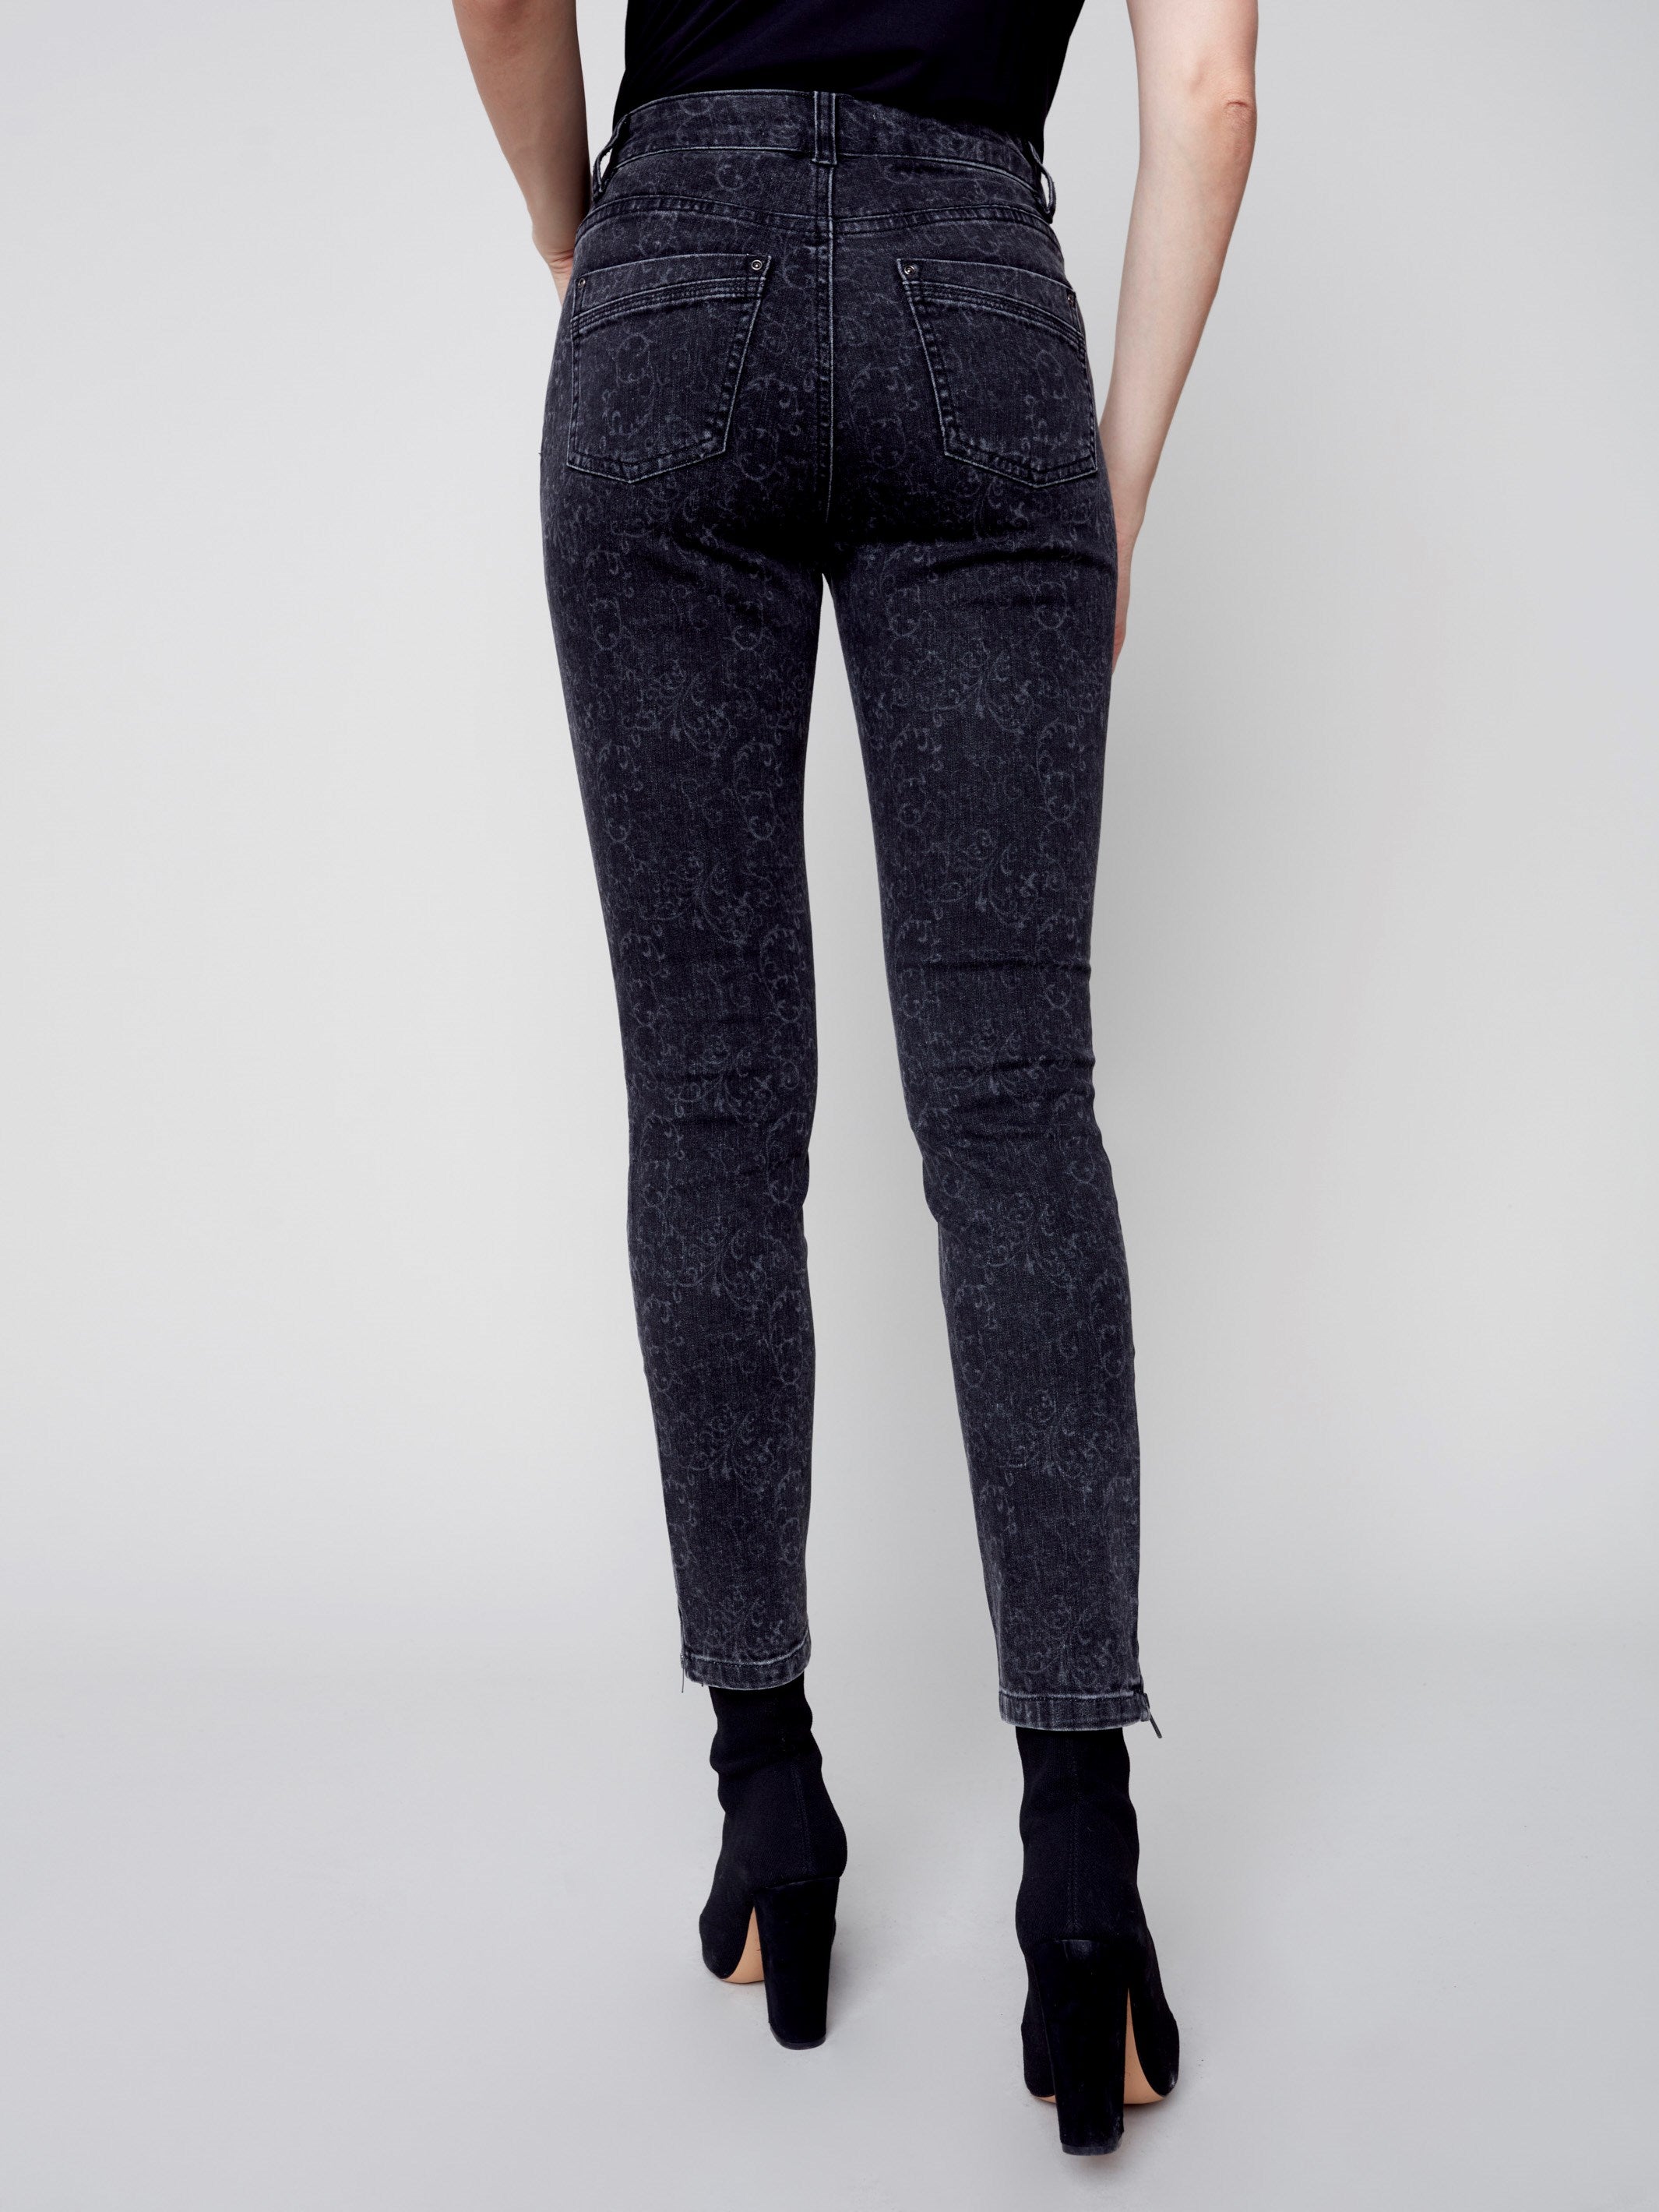 Printed Skinny Jeans with Side Zipper - Charcoal